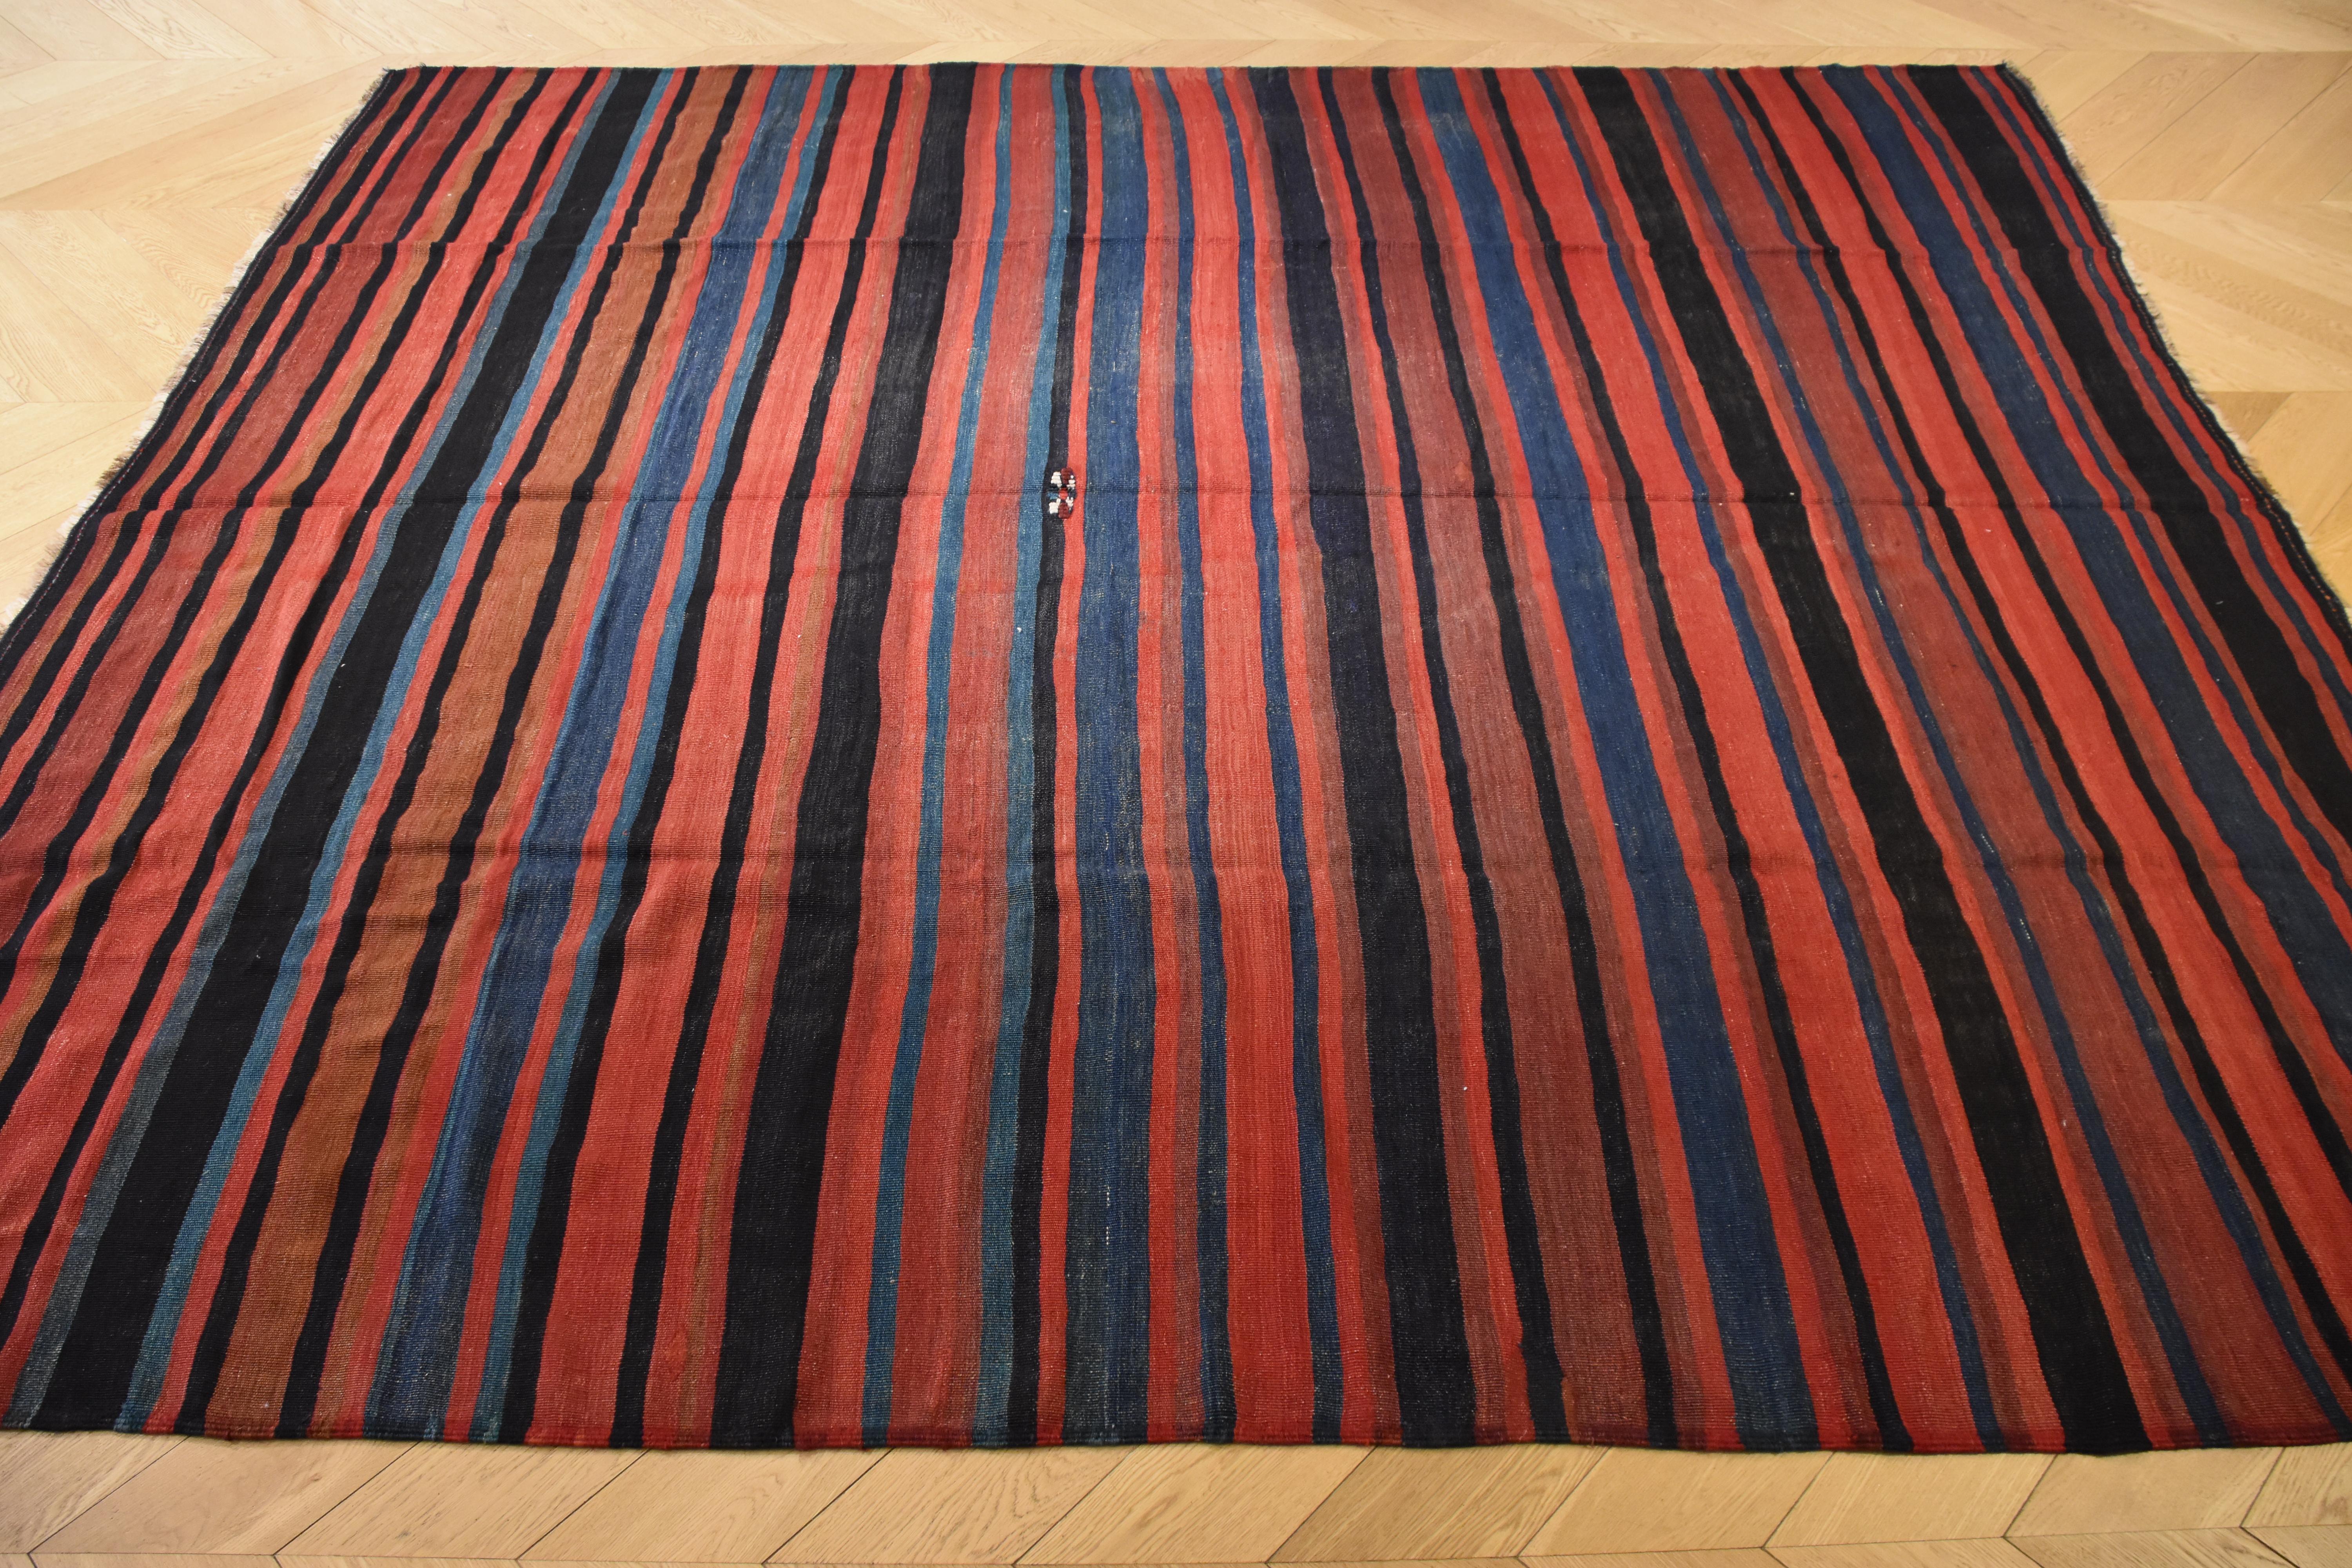 Tribal 21st Century Red and Blue Nomadic Kurdish Stripes Kilim Rug in Wool, circa 1900s For Sale